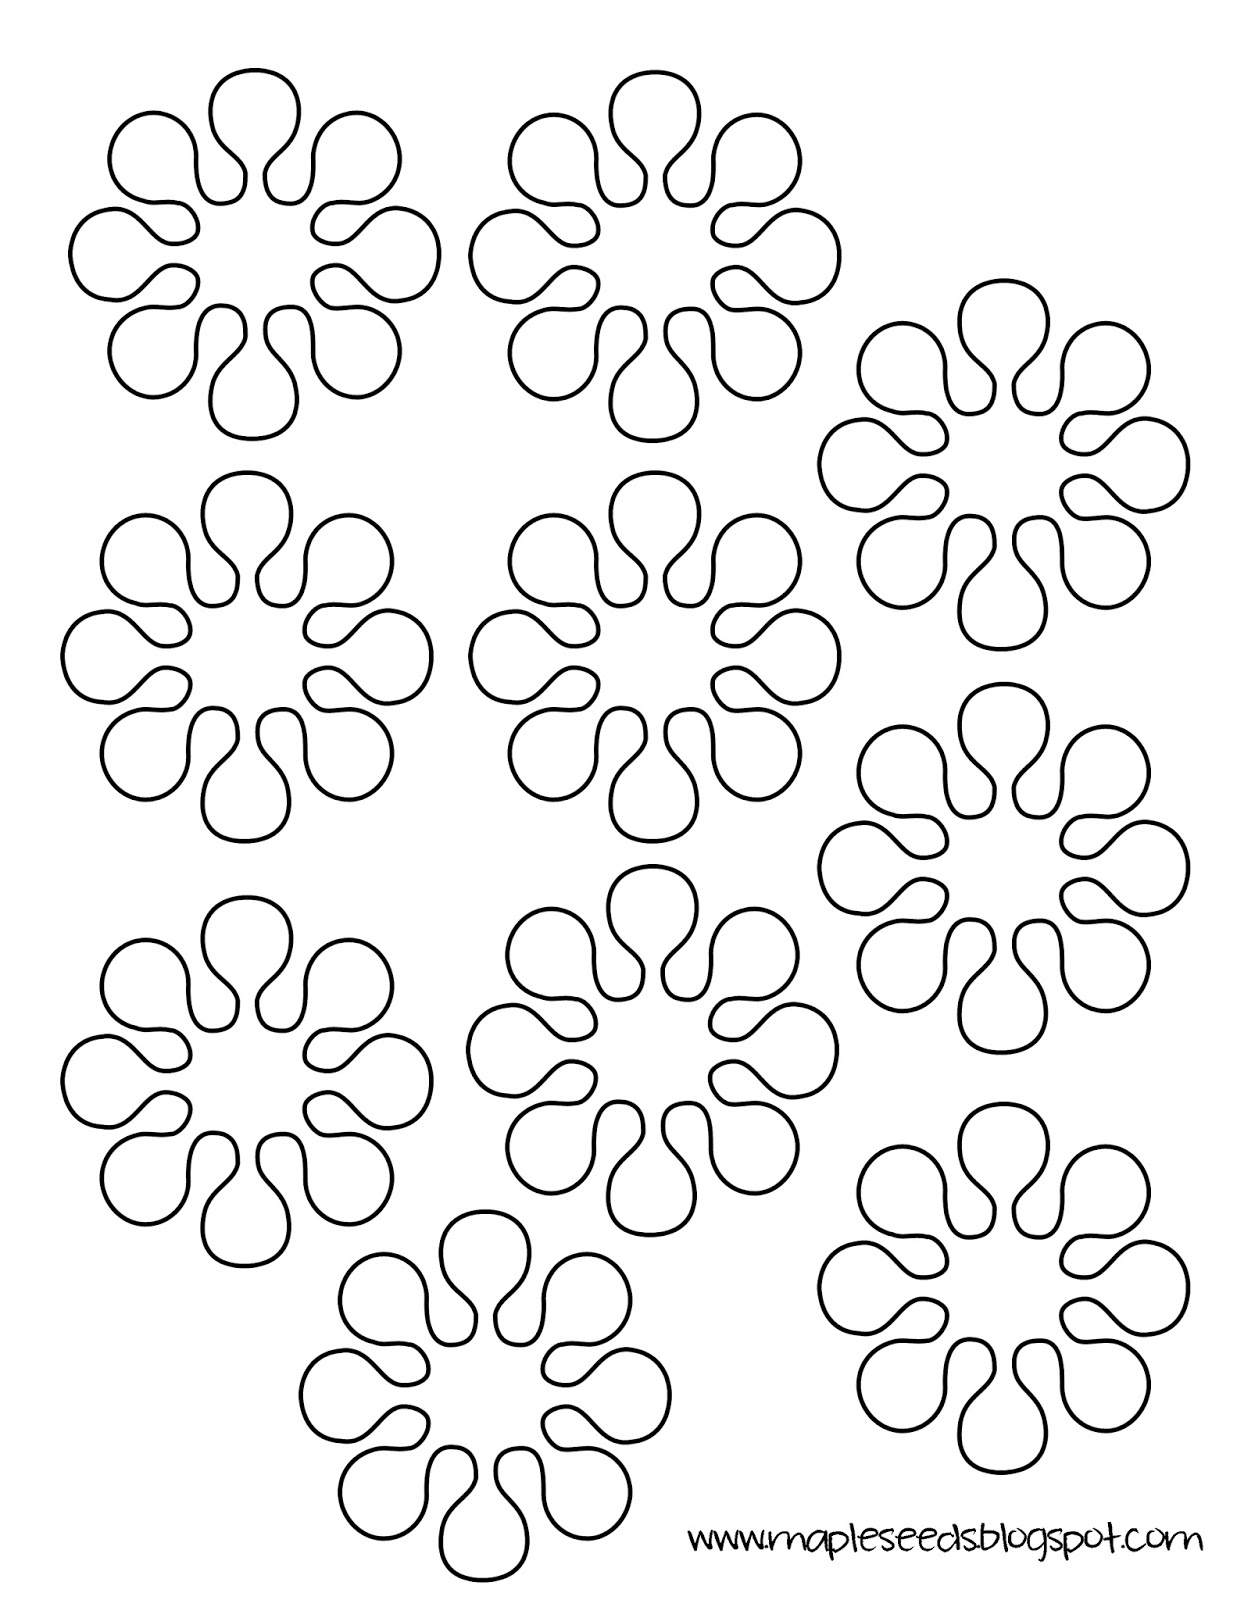 mapleseeds-home-paper-flower-bouquet-with-free-template-mapleseeds-home-blog